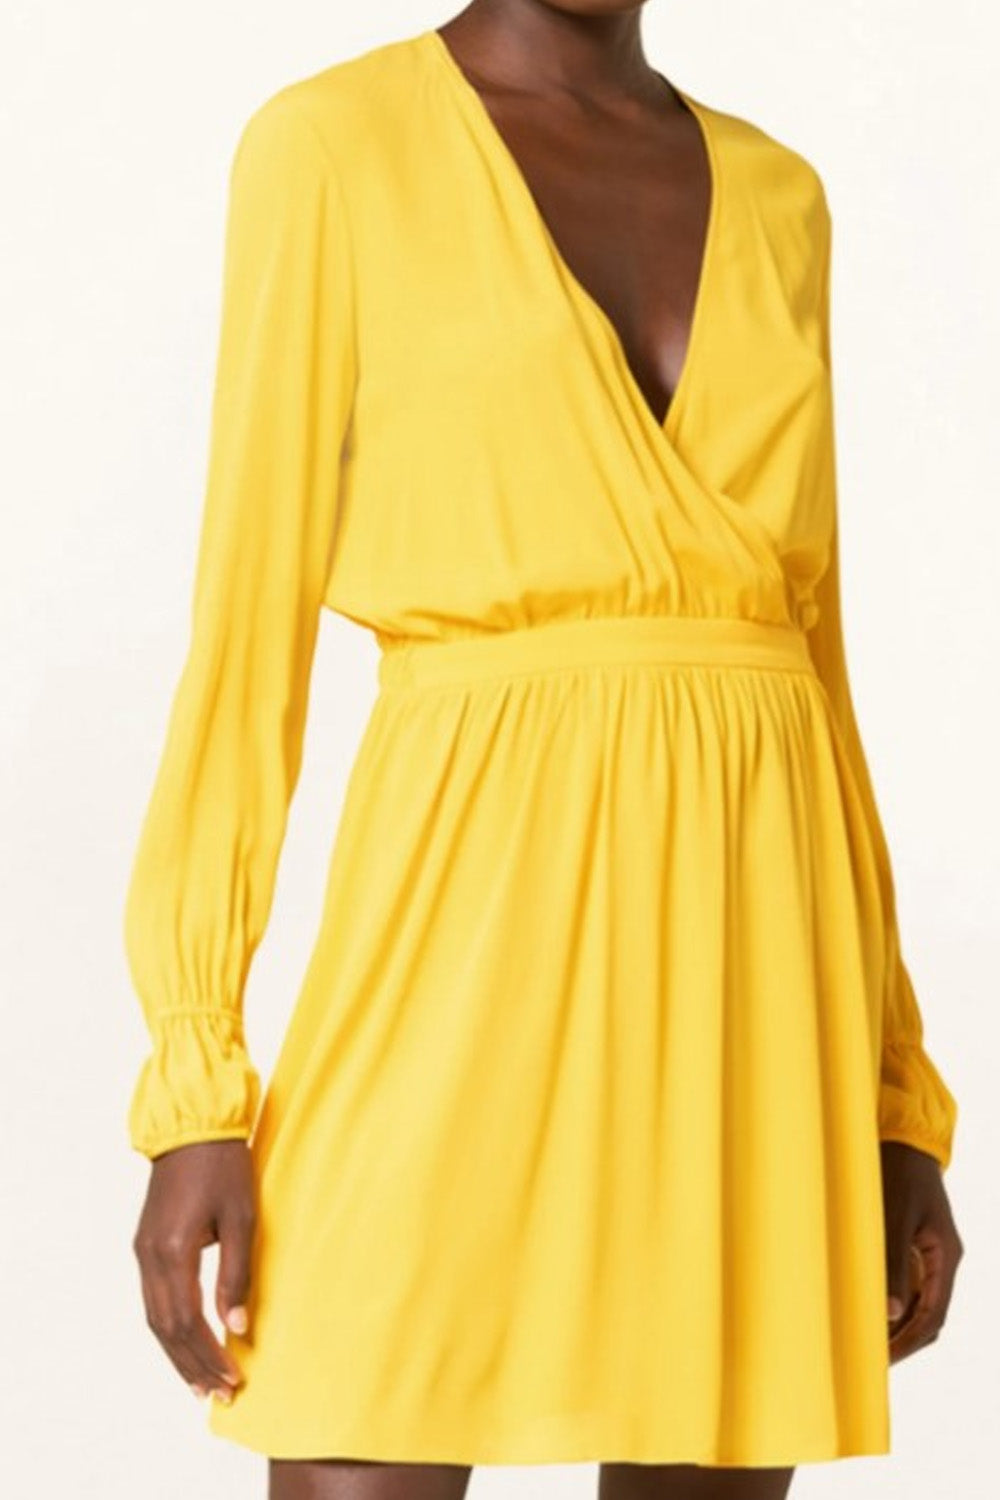 Quirky Yellow Dress